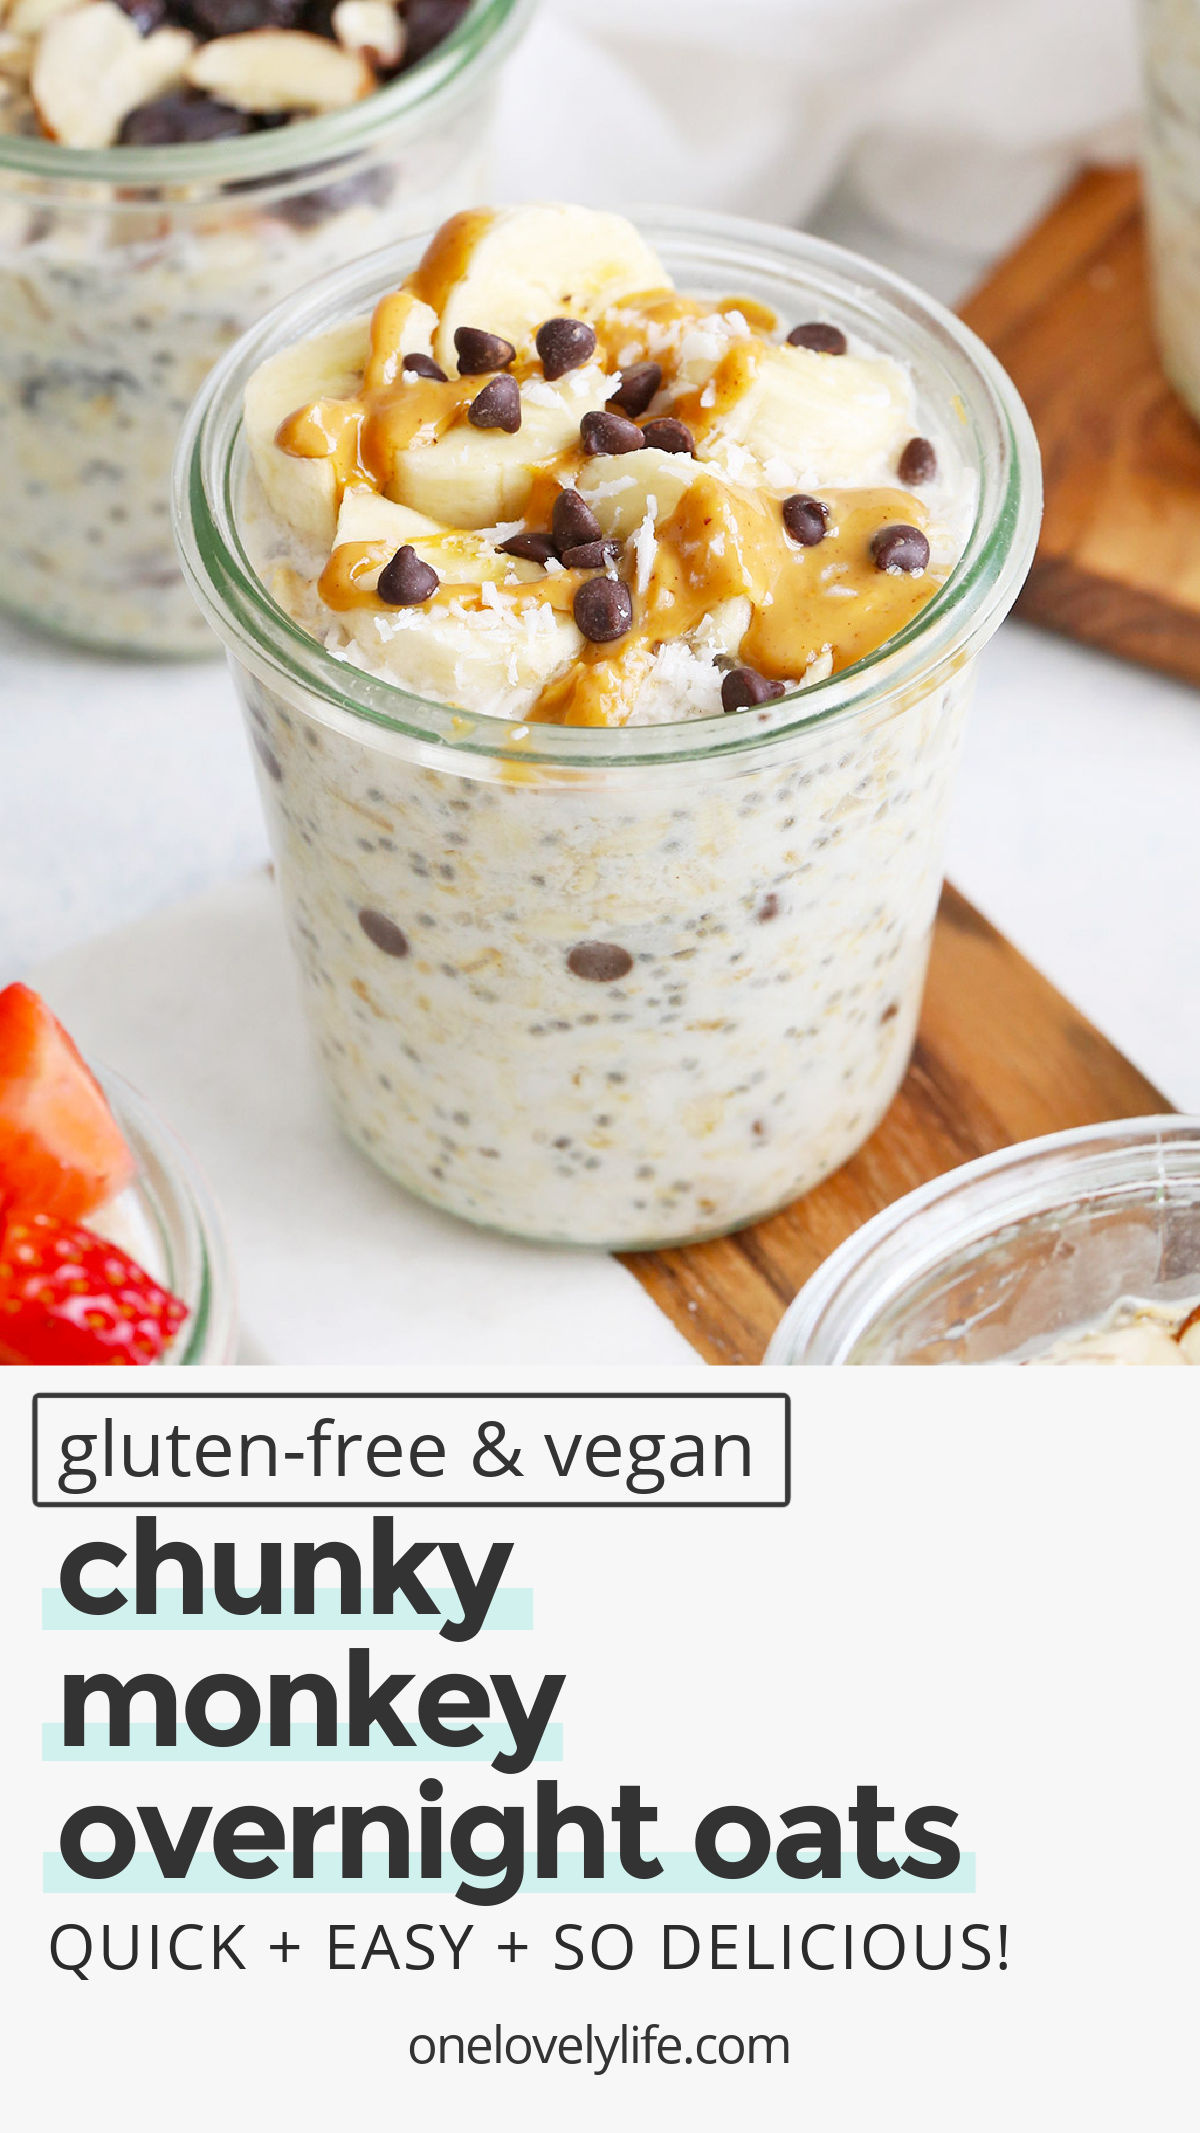 Chunky Monkey Overnight Oats - Creamy peanut butter banana overnight oats with a little sprinkle of coconut and chocolate on top. You'll LOVE this make-ahead breakfast! (Gluten-free, vegan) // Meal Prep Breakfast // Peanut Butter Banana Overnight Oats // Healthy Breakfast // Chunky Monkey Overnight Oatmeal // Peanut Butter Overnight Oats